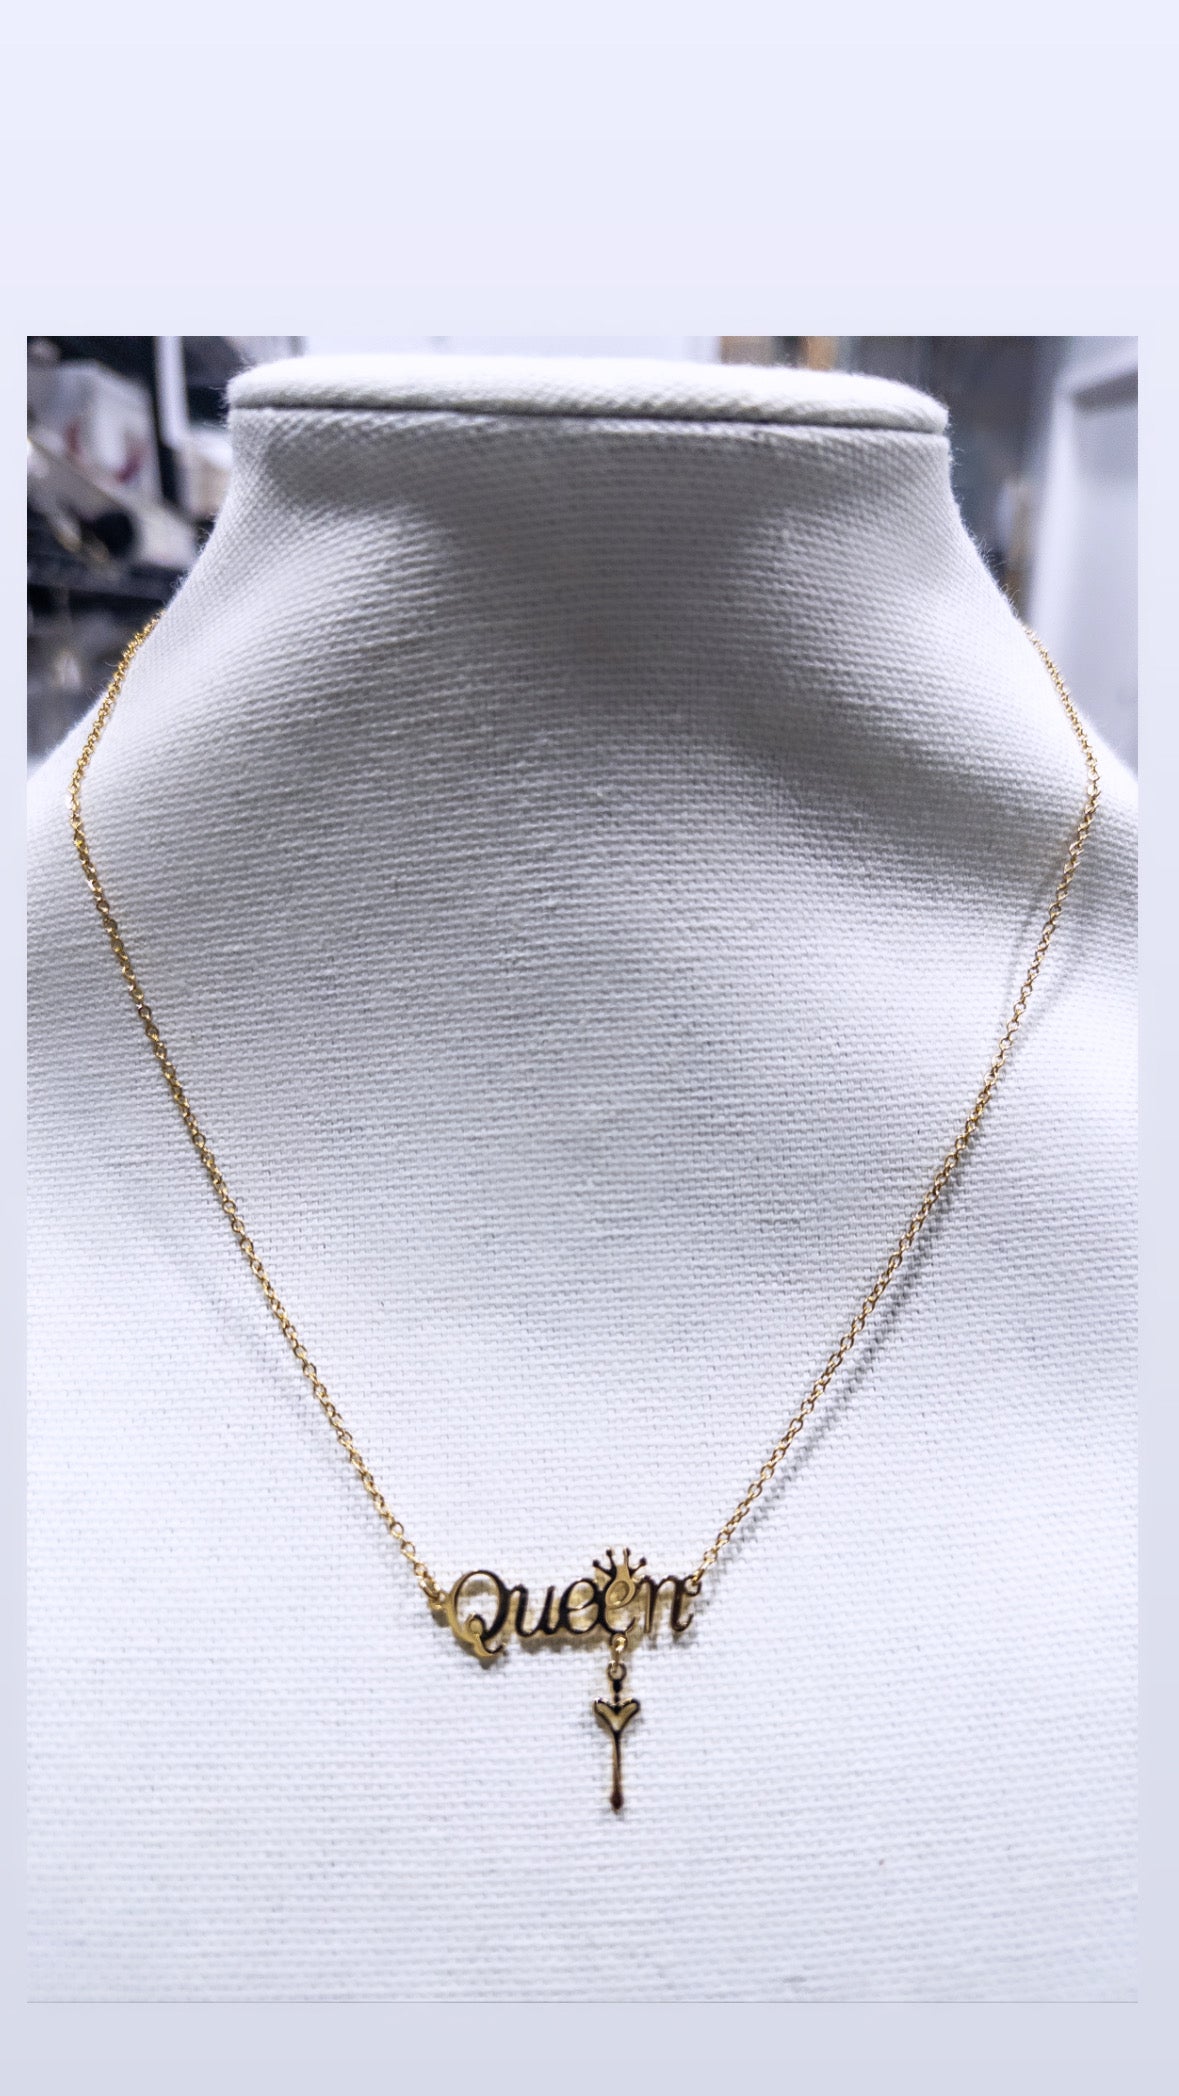 The Queen pendant Necklace